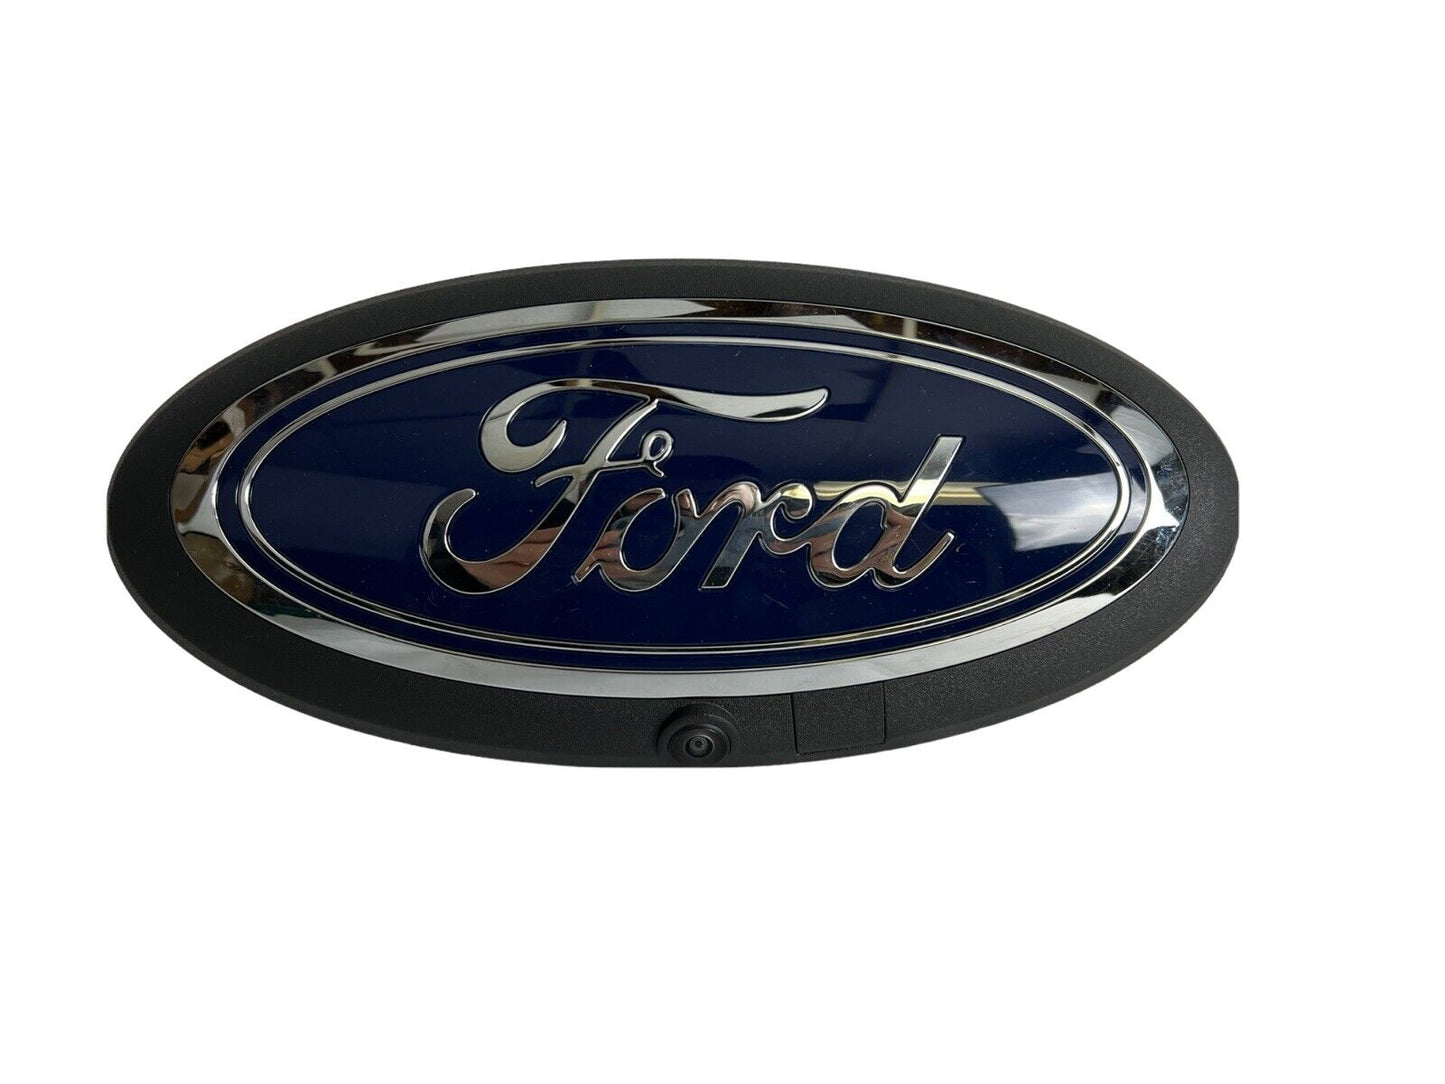 2023 Ford F-150 Grille  Emblem With Camera NEW OEM